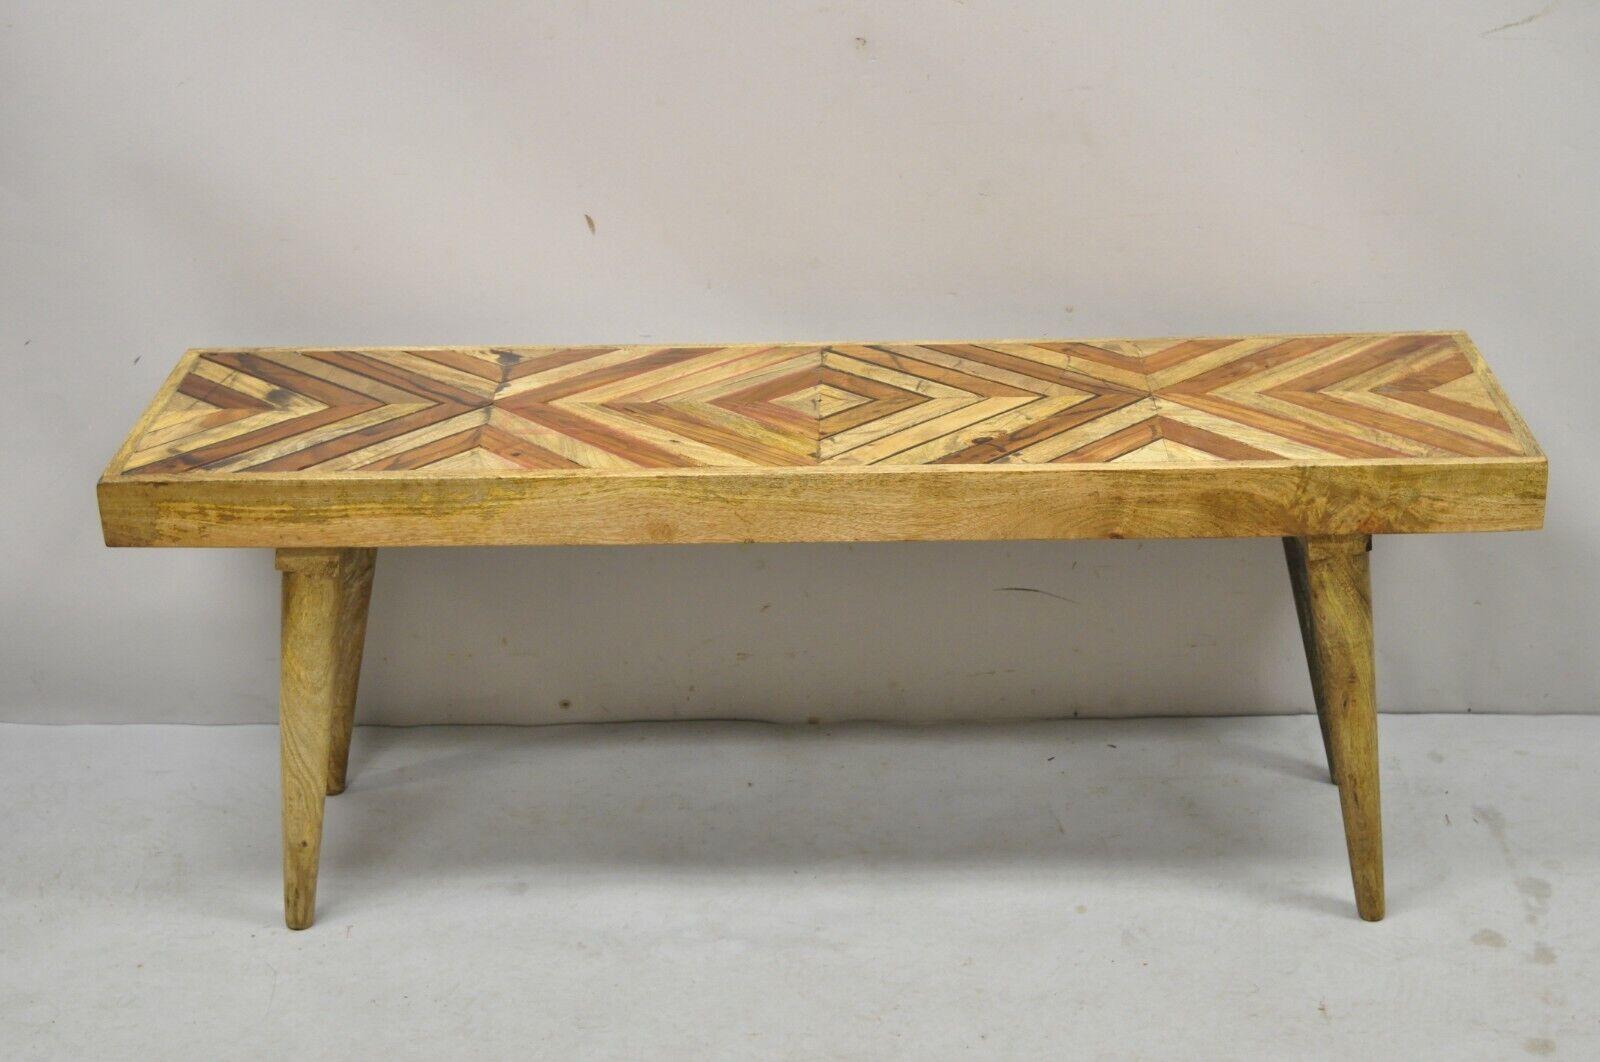 Modern Slatted Wood Geometric Inlay Rustic Farmhouse Coffee Table Bench For Sale 4